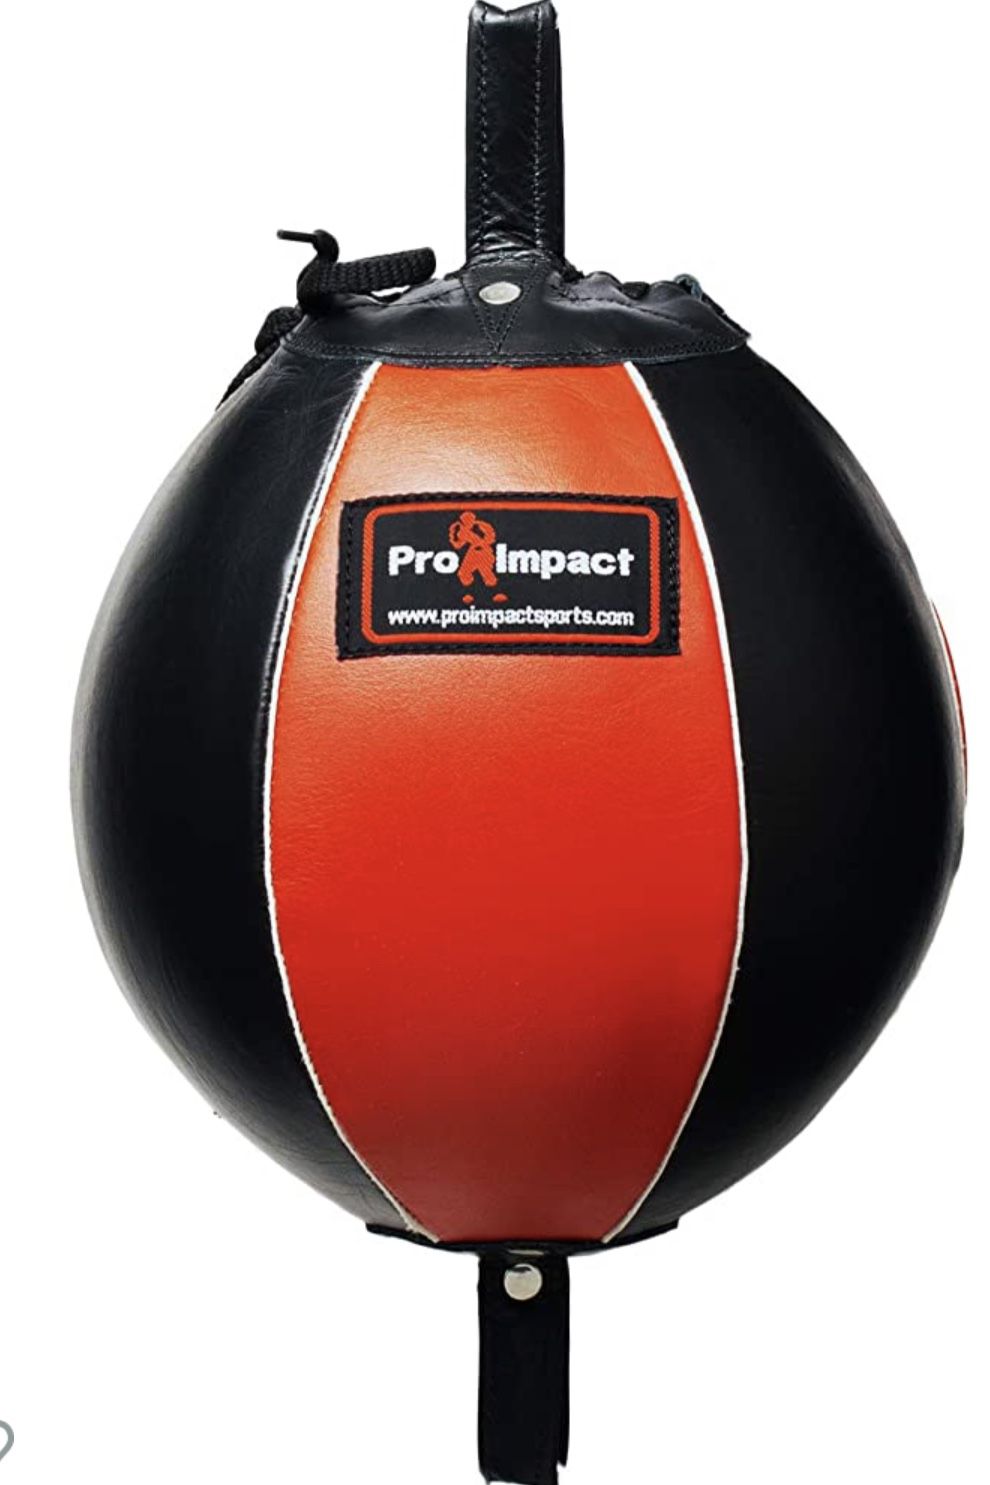 Pro Impact Genuine Leather Double End Boxing Punching Bag - Speed Striking & Dodge Training Ball - Includes Cords & Hooks for Gym Workout MMA Muay Tha